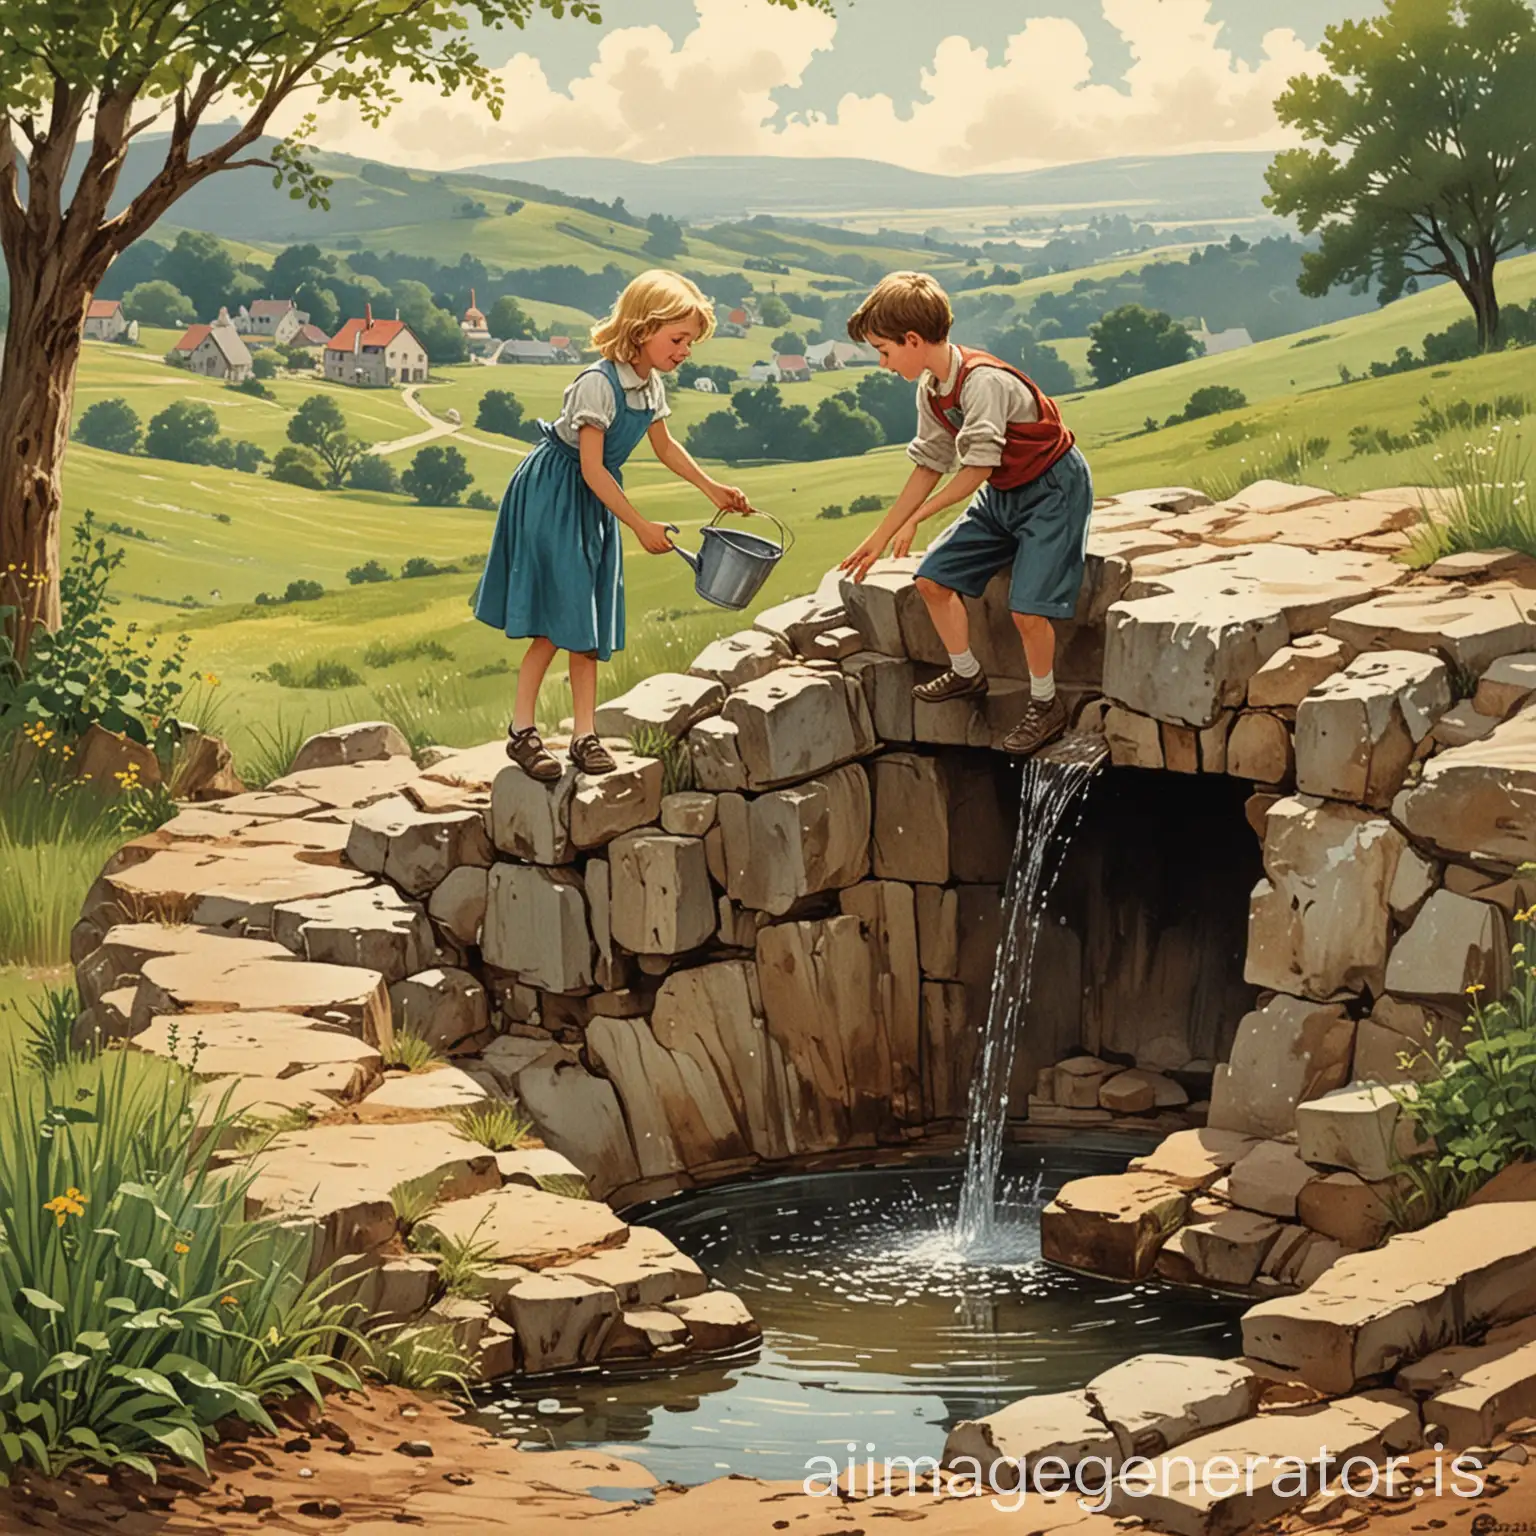 Illustrations from Vintage Children's Books: Look for illustrations from old children's books that depict boy and girl  .top of  the hill, boy fetching water from a well
,